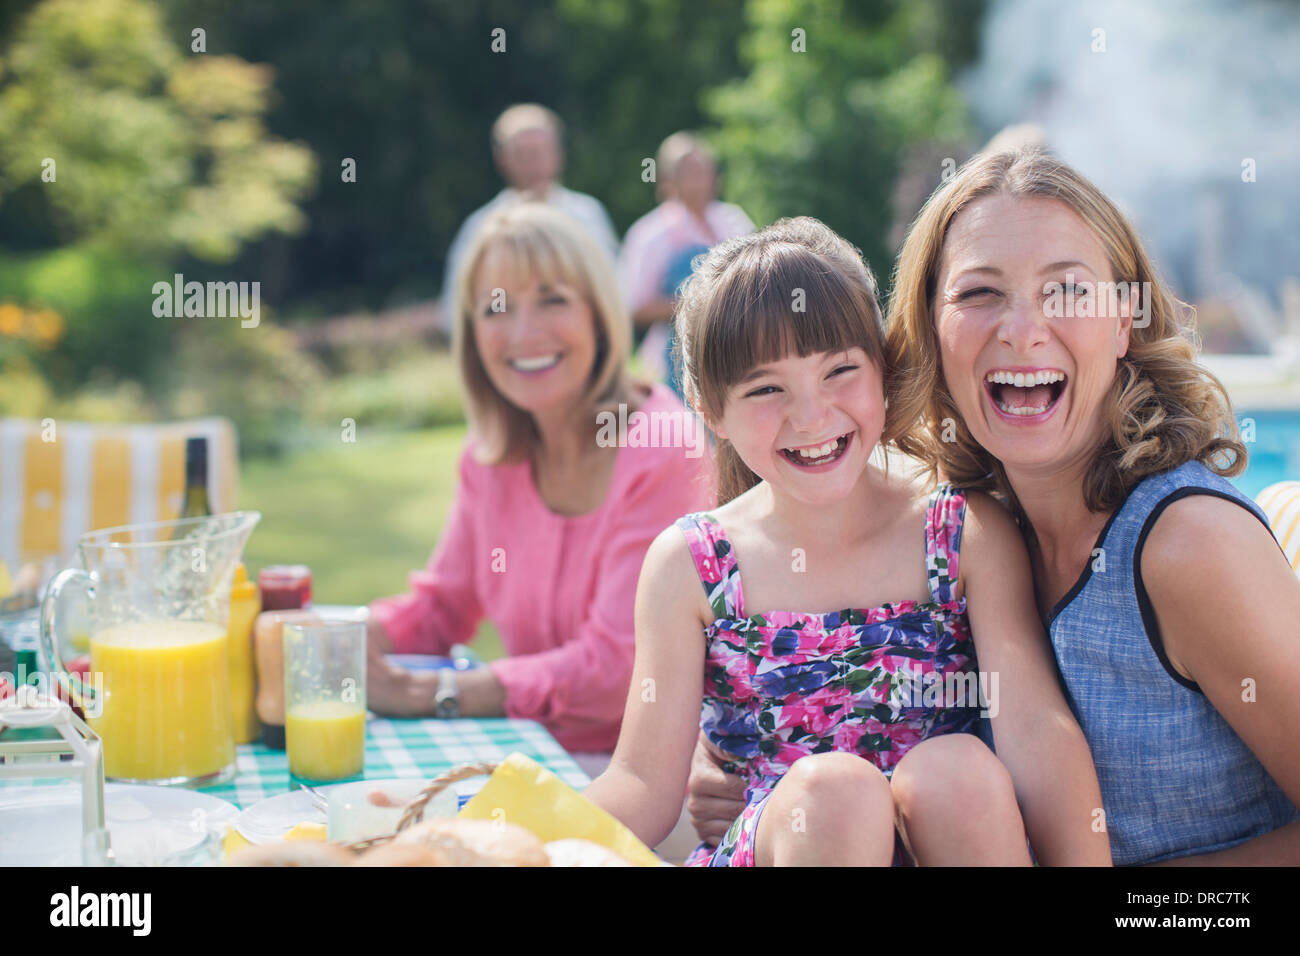 Multi-generation family laughing at table in backyard Banque D'Images